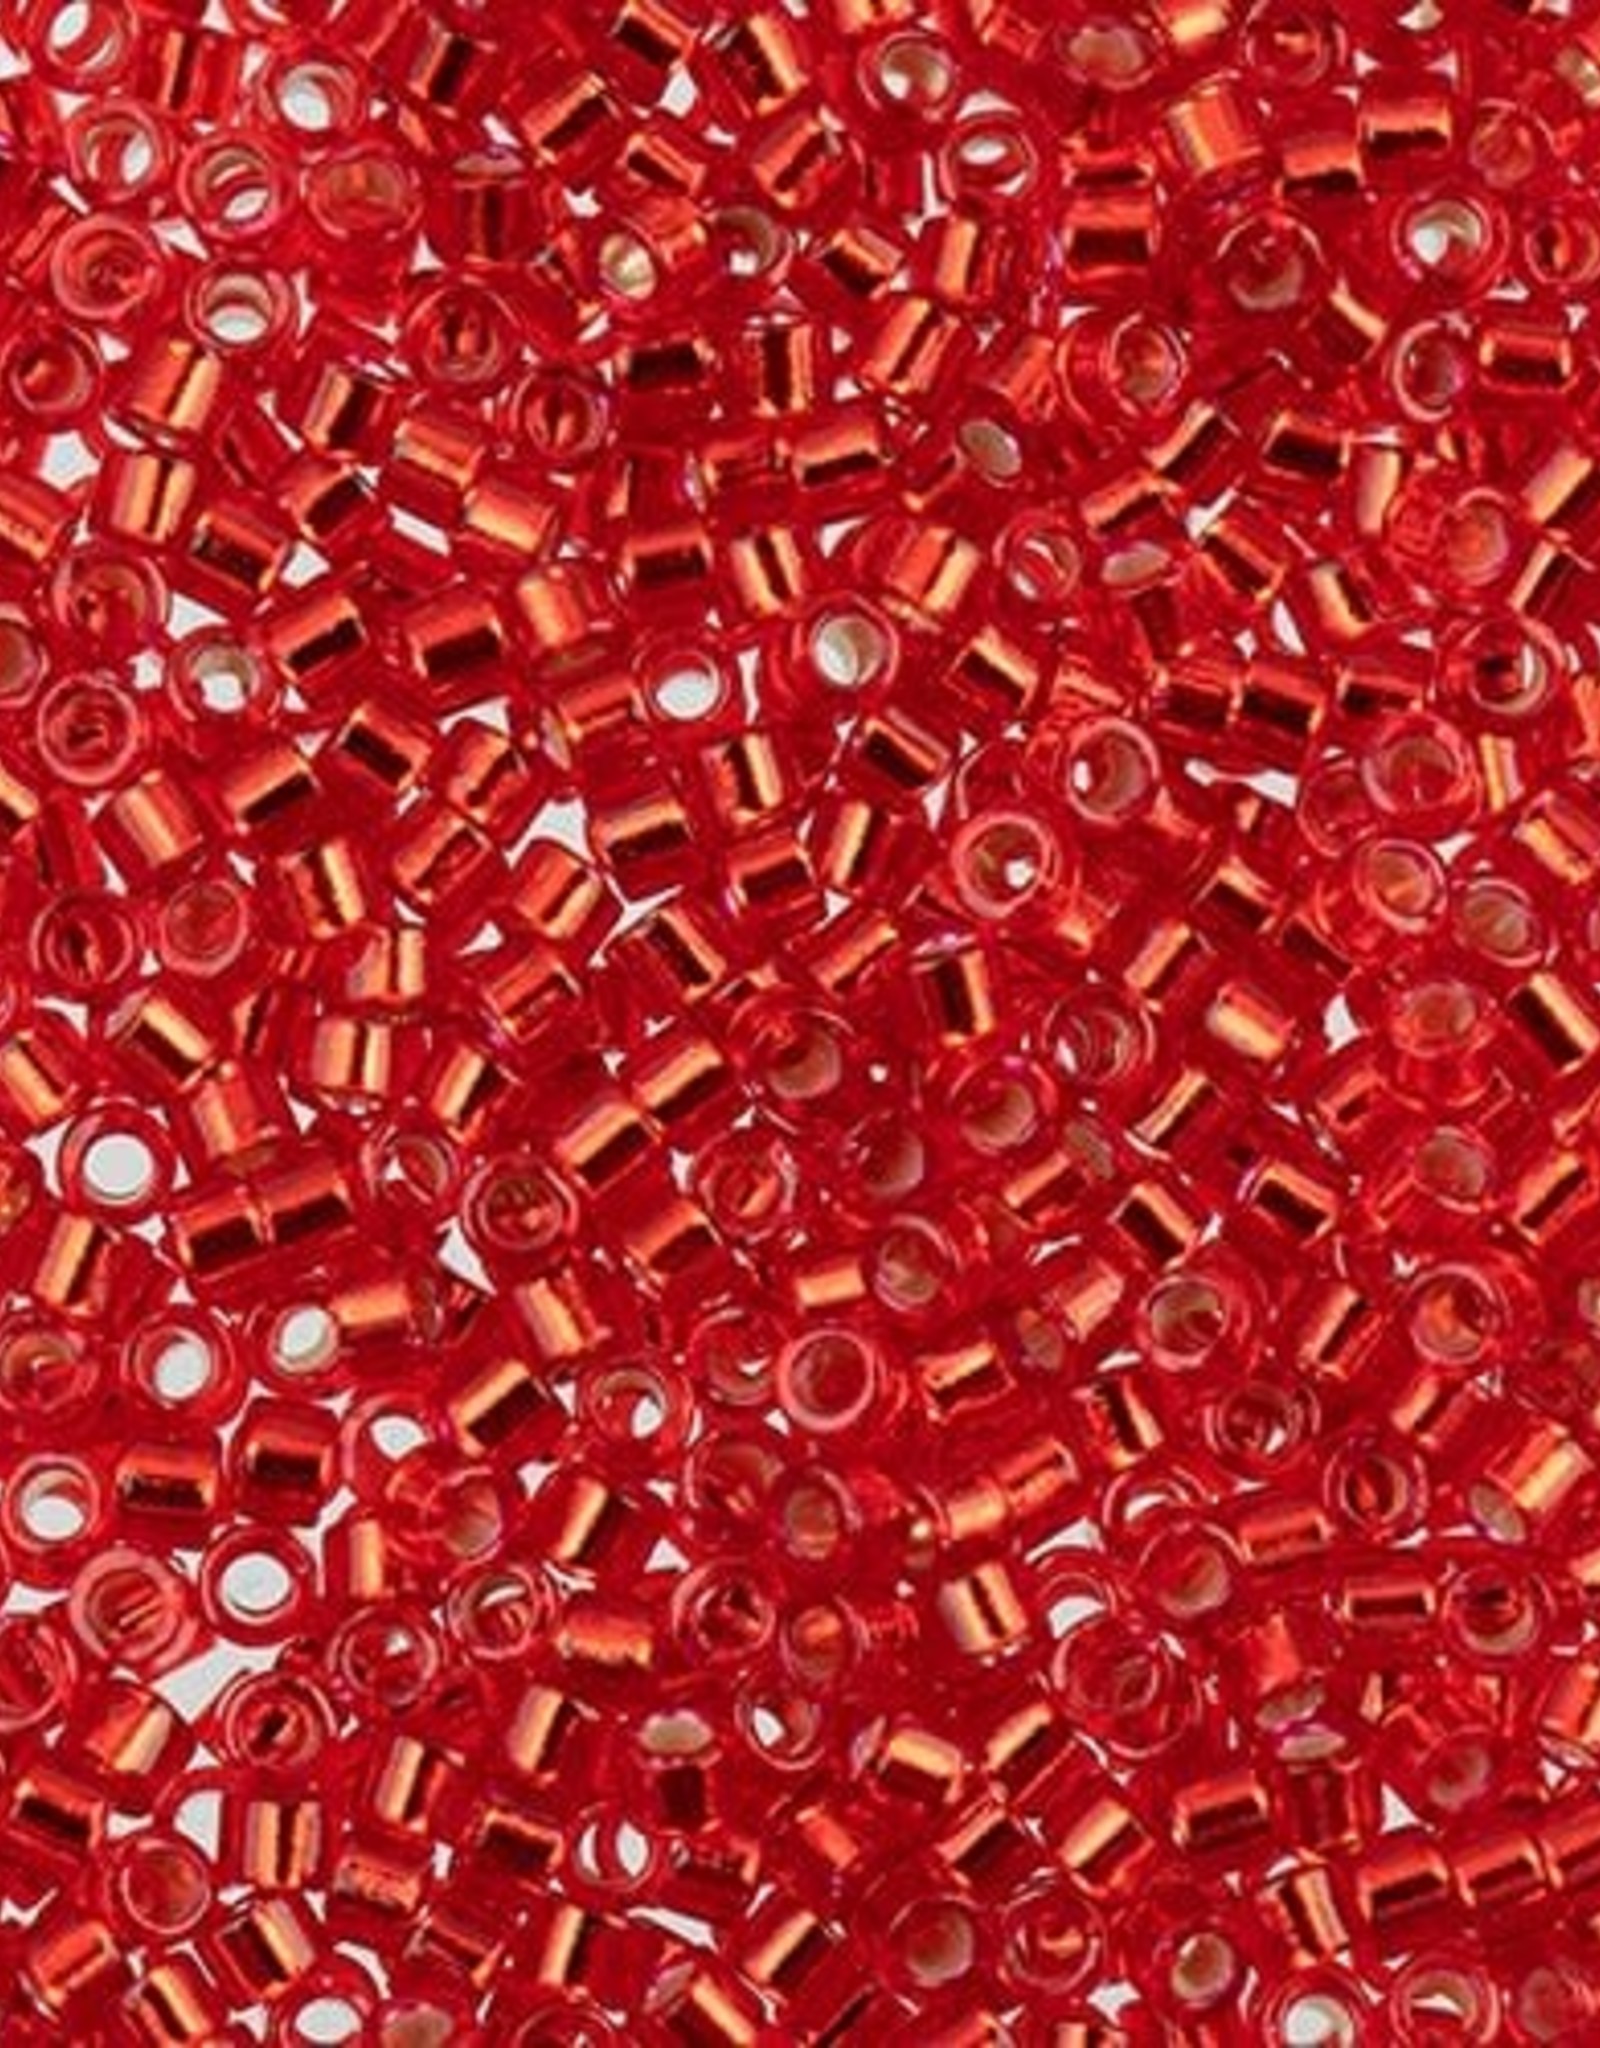 Miyuki Delica Seed Beads Delica 11/0 RD Program Red Silver Lined-Dyed 0602V